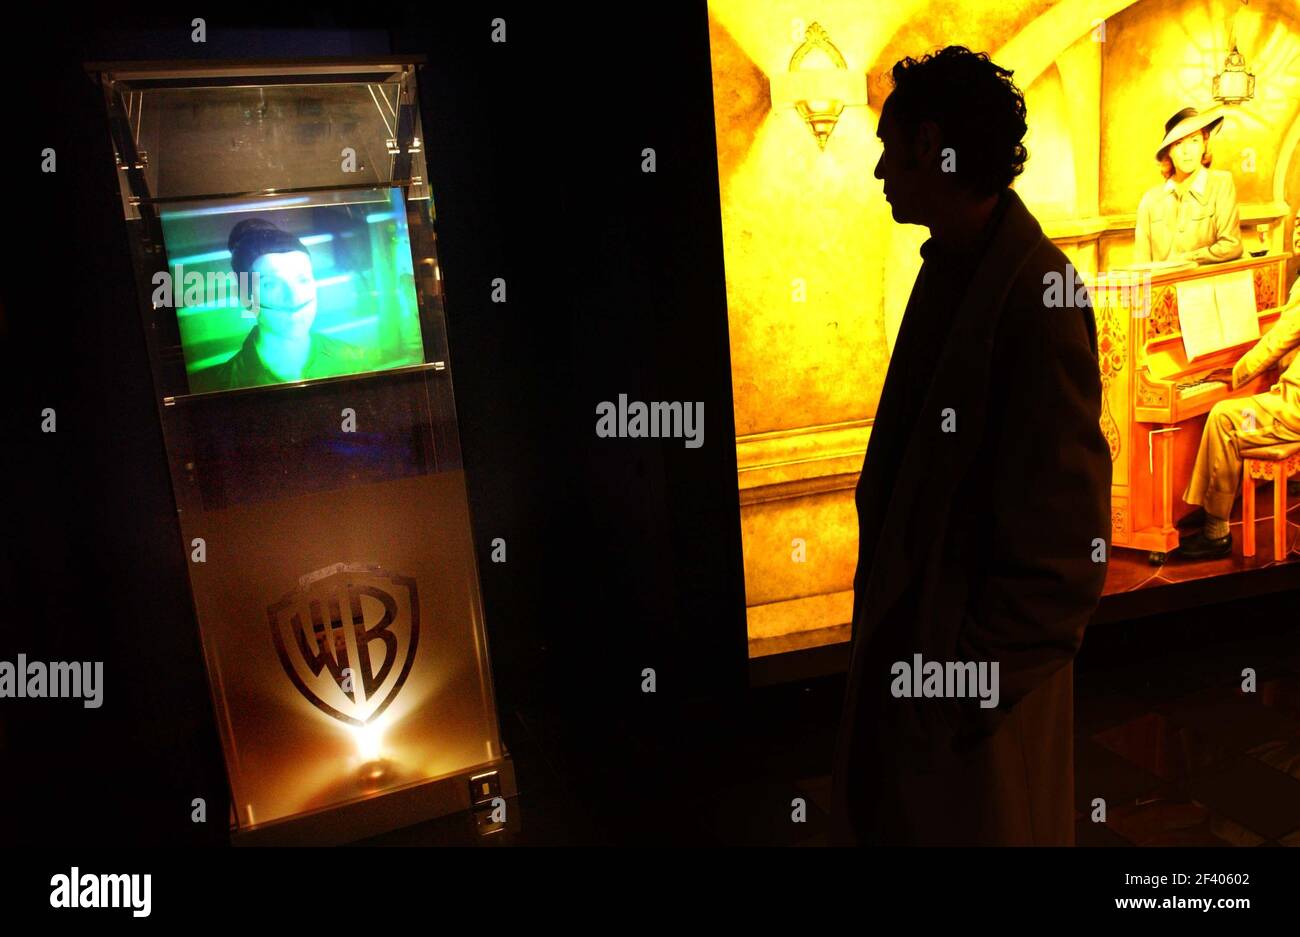 TONY YOUNG, CHIEF EXEC AT 'COLOUR HOLOGRAPHIC' EXAMINES THEIR FIRST PUBLICLY DISPLAYED FILM HOLOGRAPH AT THE WARNER VILLAGE.23 November 2001 PHOTO ANDY PARADISE Stock Photo